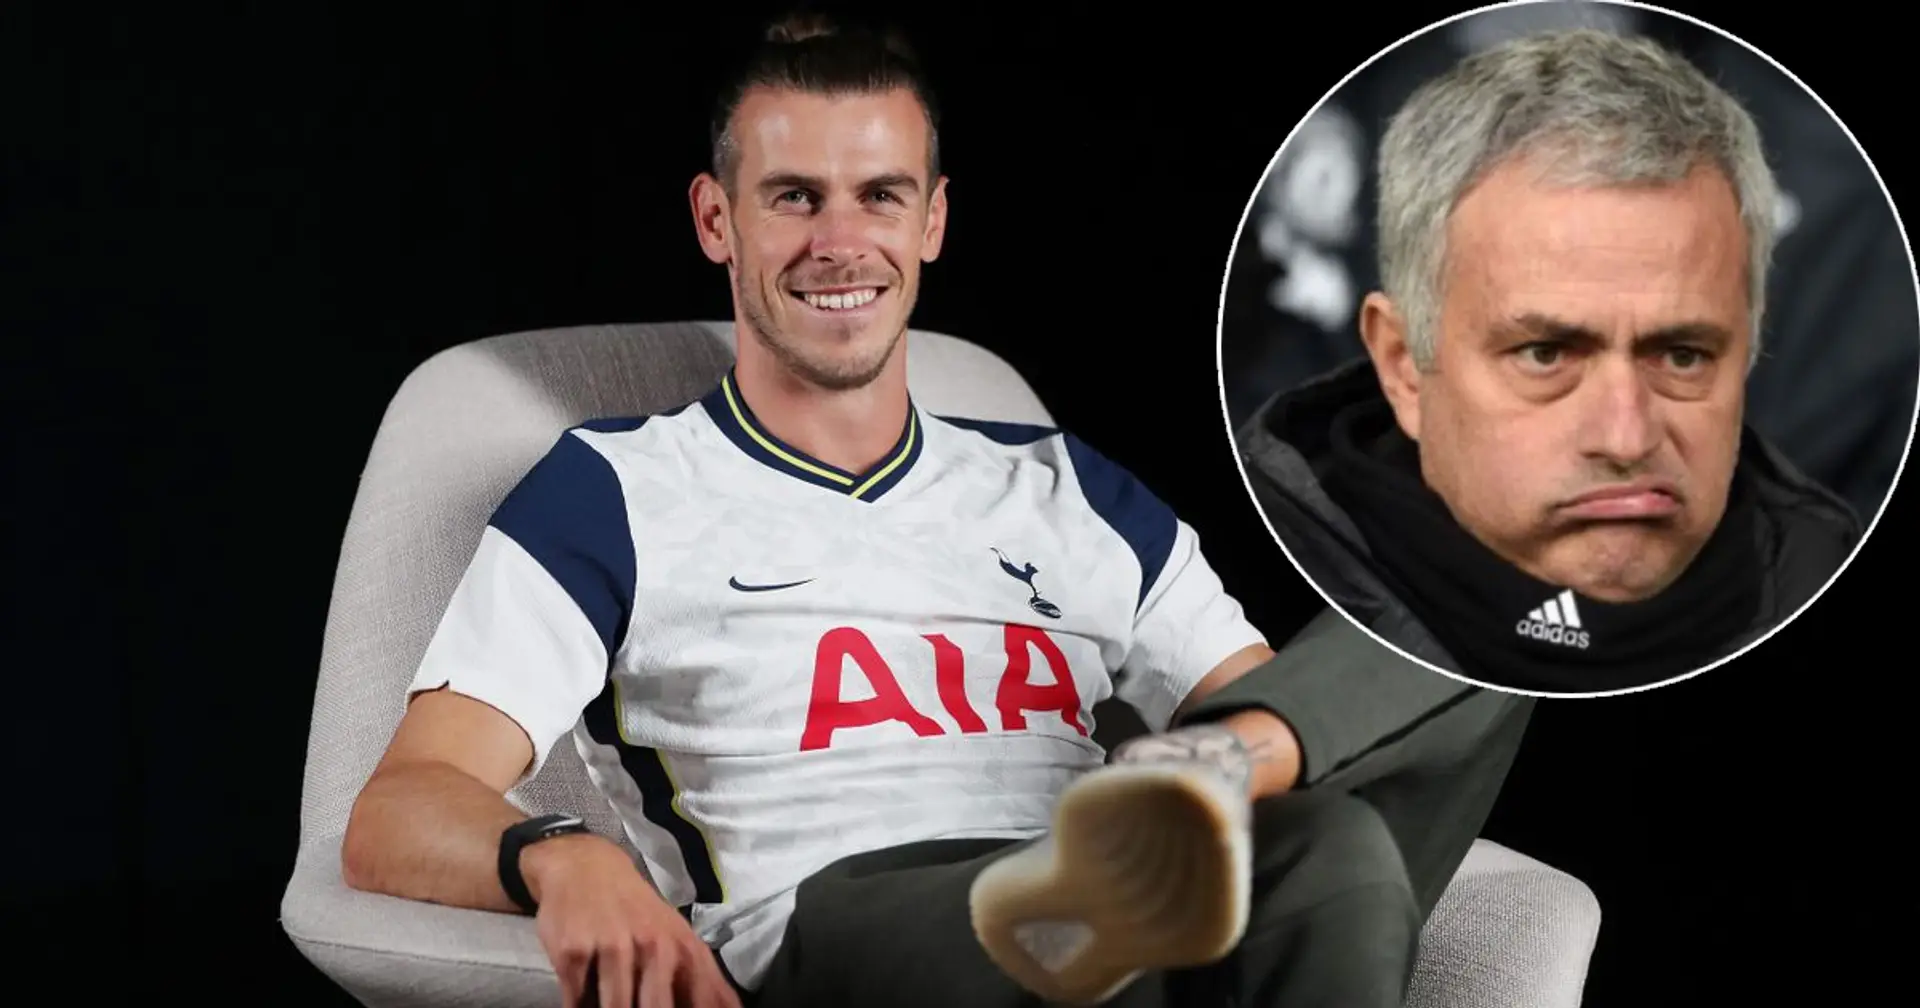 Tottenham Hotspur intends to extend Gareth Bale's loan deal by one year (relaibility: 4 stars)